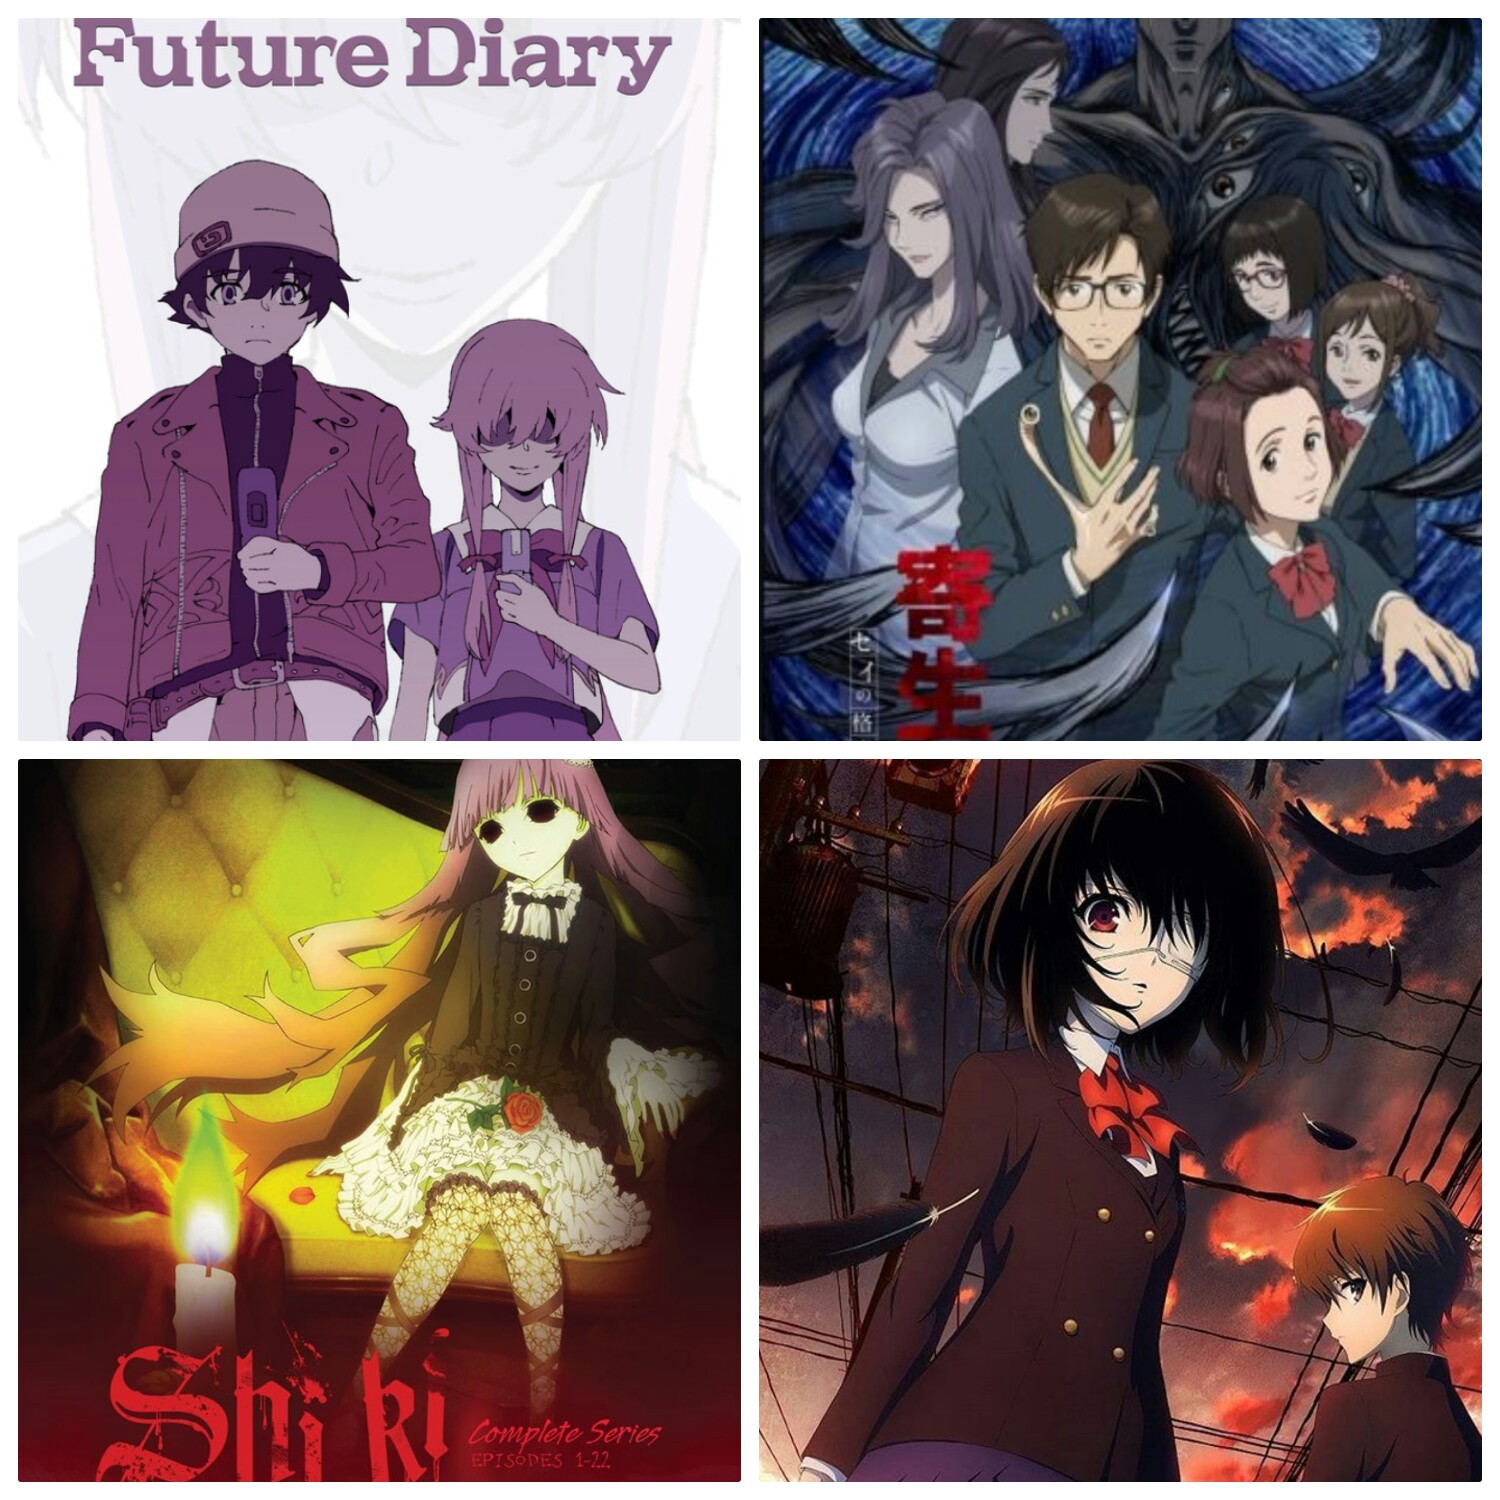 35 Scariest Horror Anime To Wet Your Pants Watching Series  Movies   FandomSpot